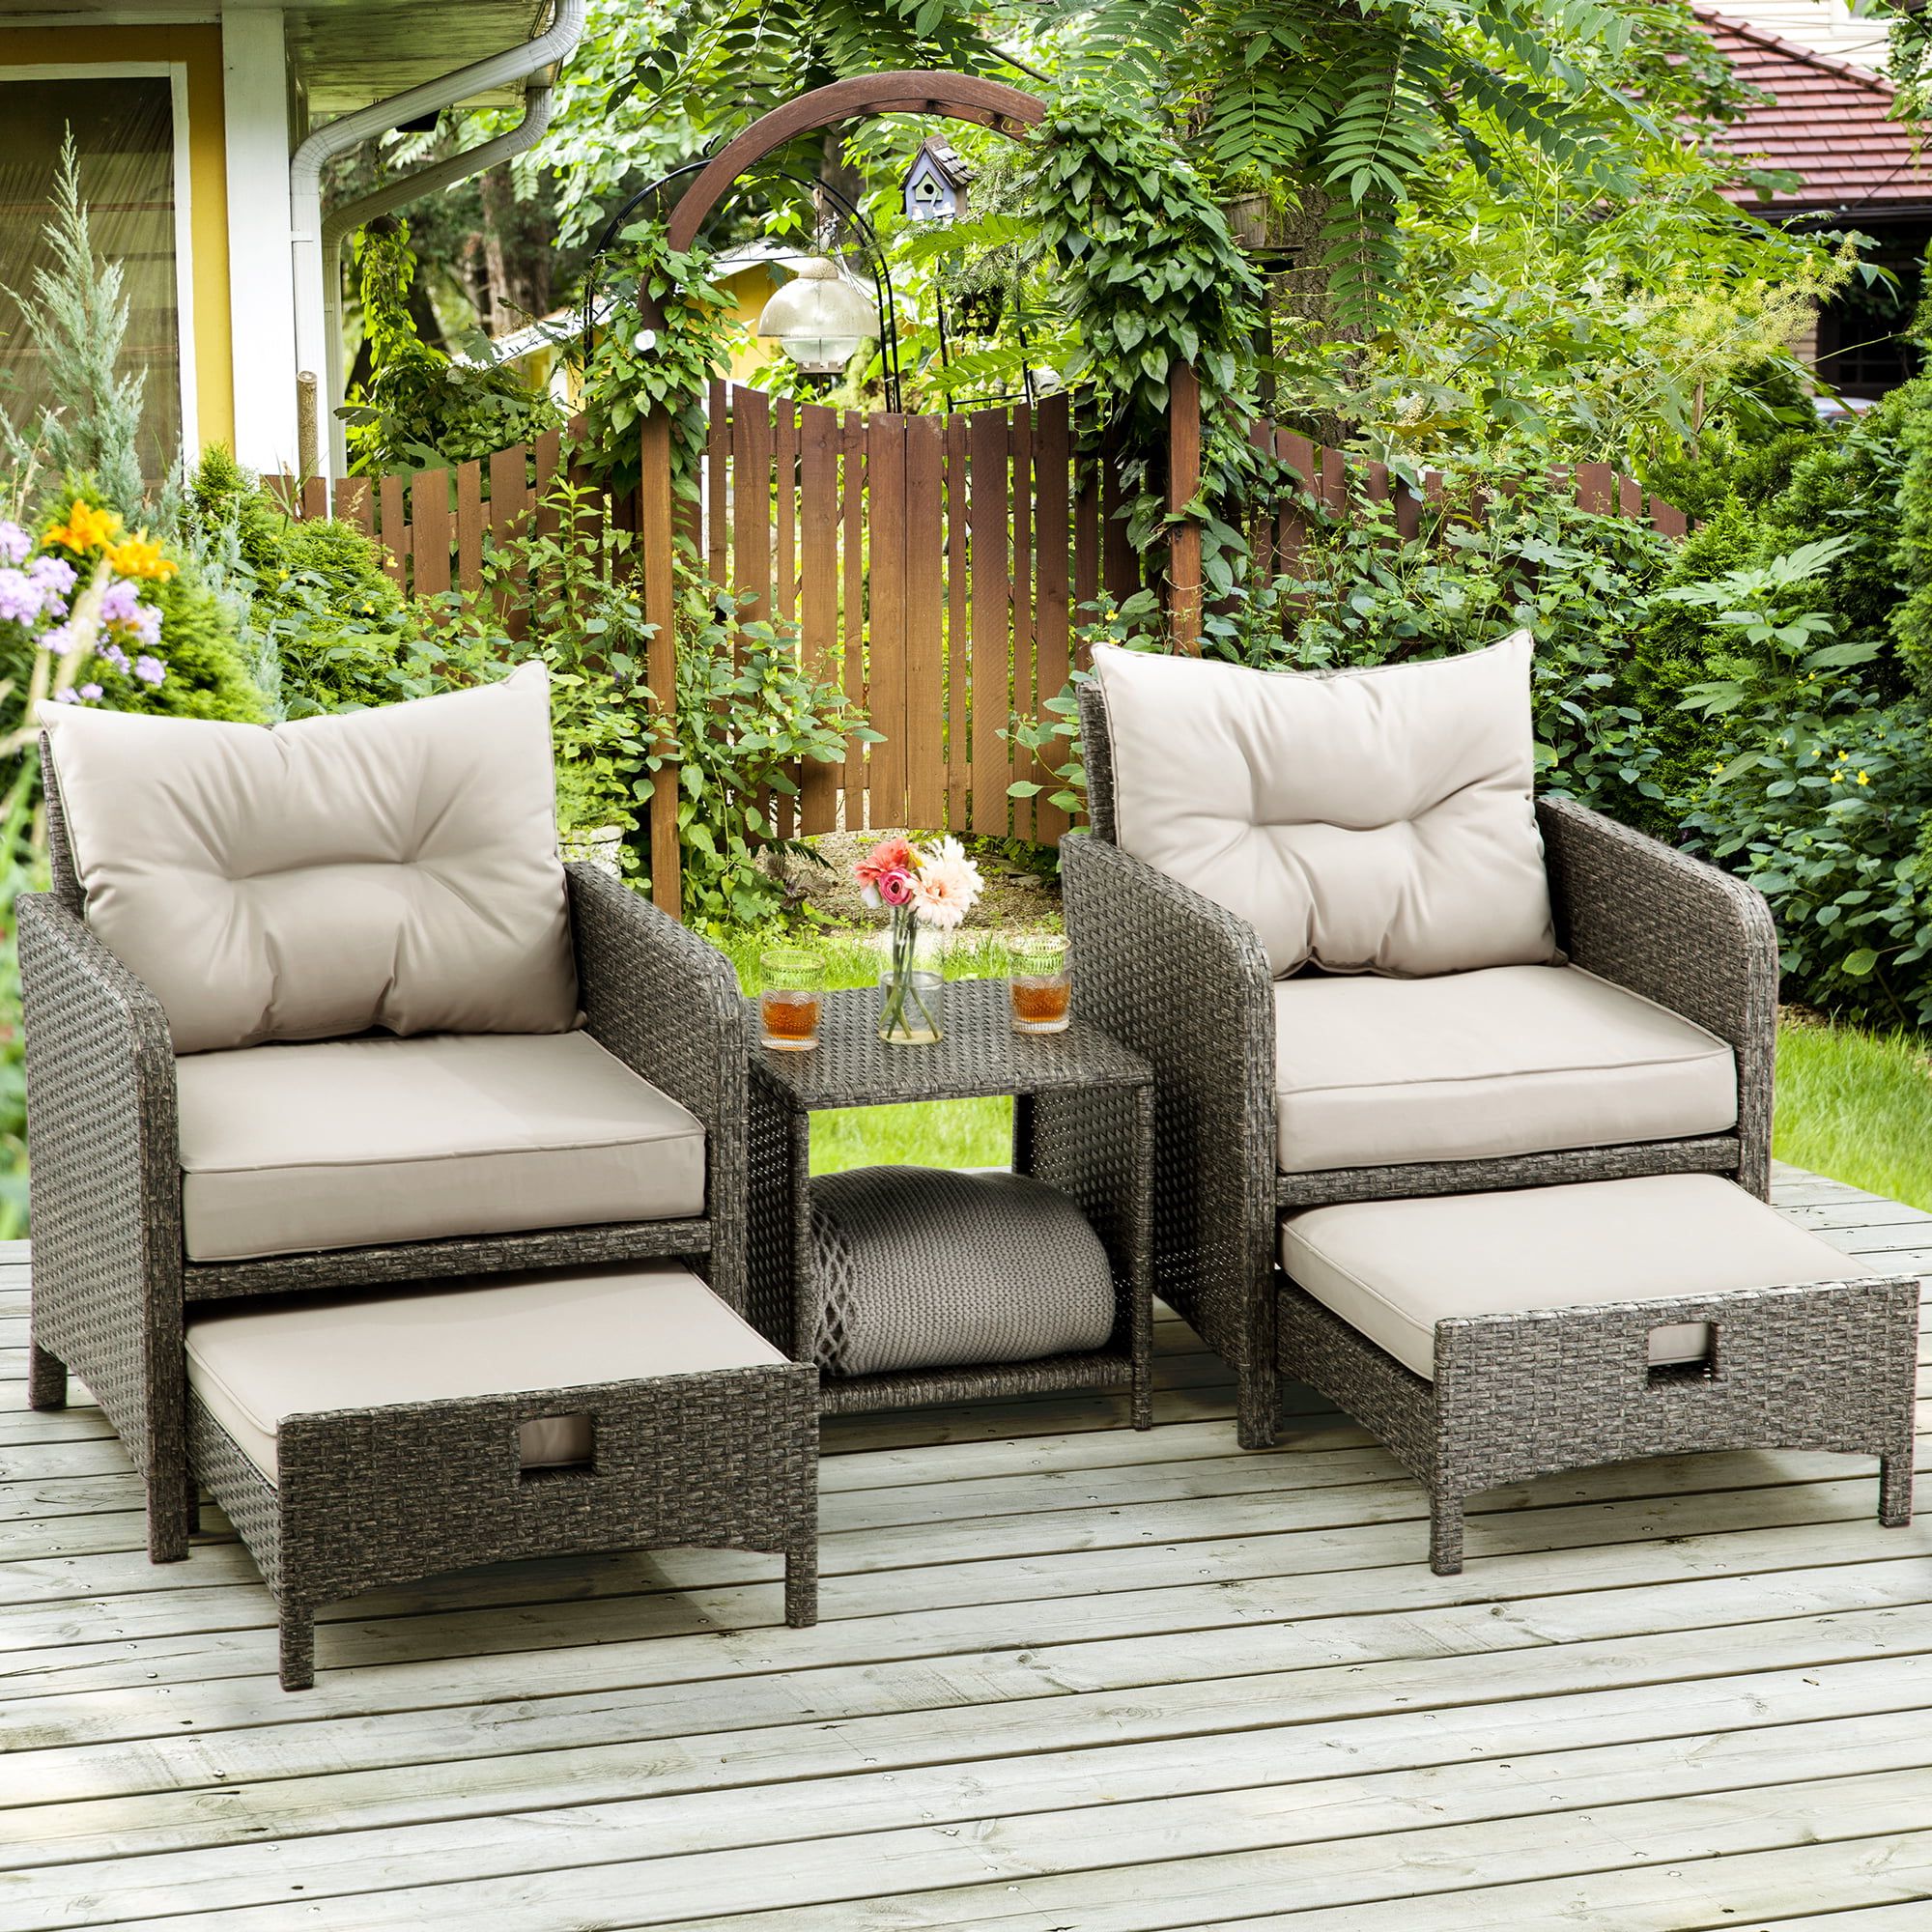 Pamapic 5 Pieces Wicker Patio Furniture Set Outdoor Patio Chairs With  Ottomans (gray) – Walmart Intended For Trendy 5 Piece Patio Conversation Set (Photo 10 of 16)